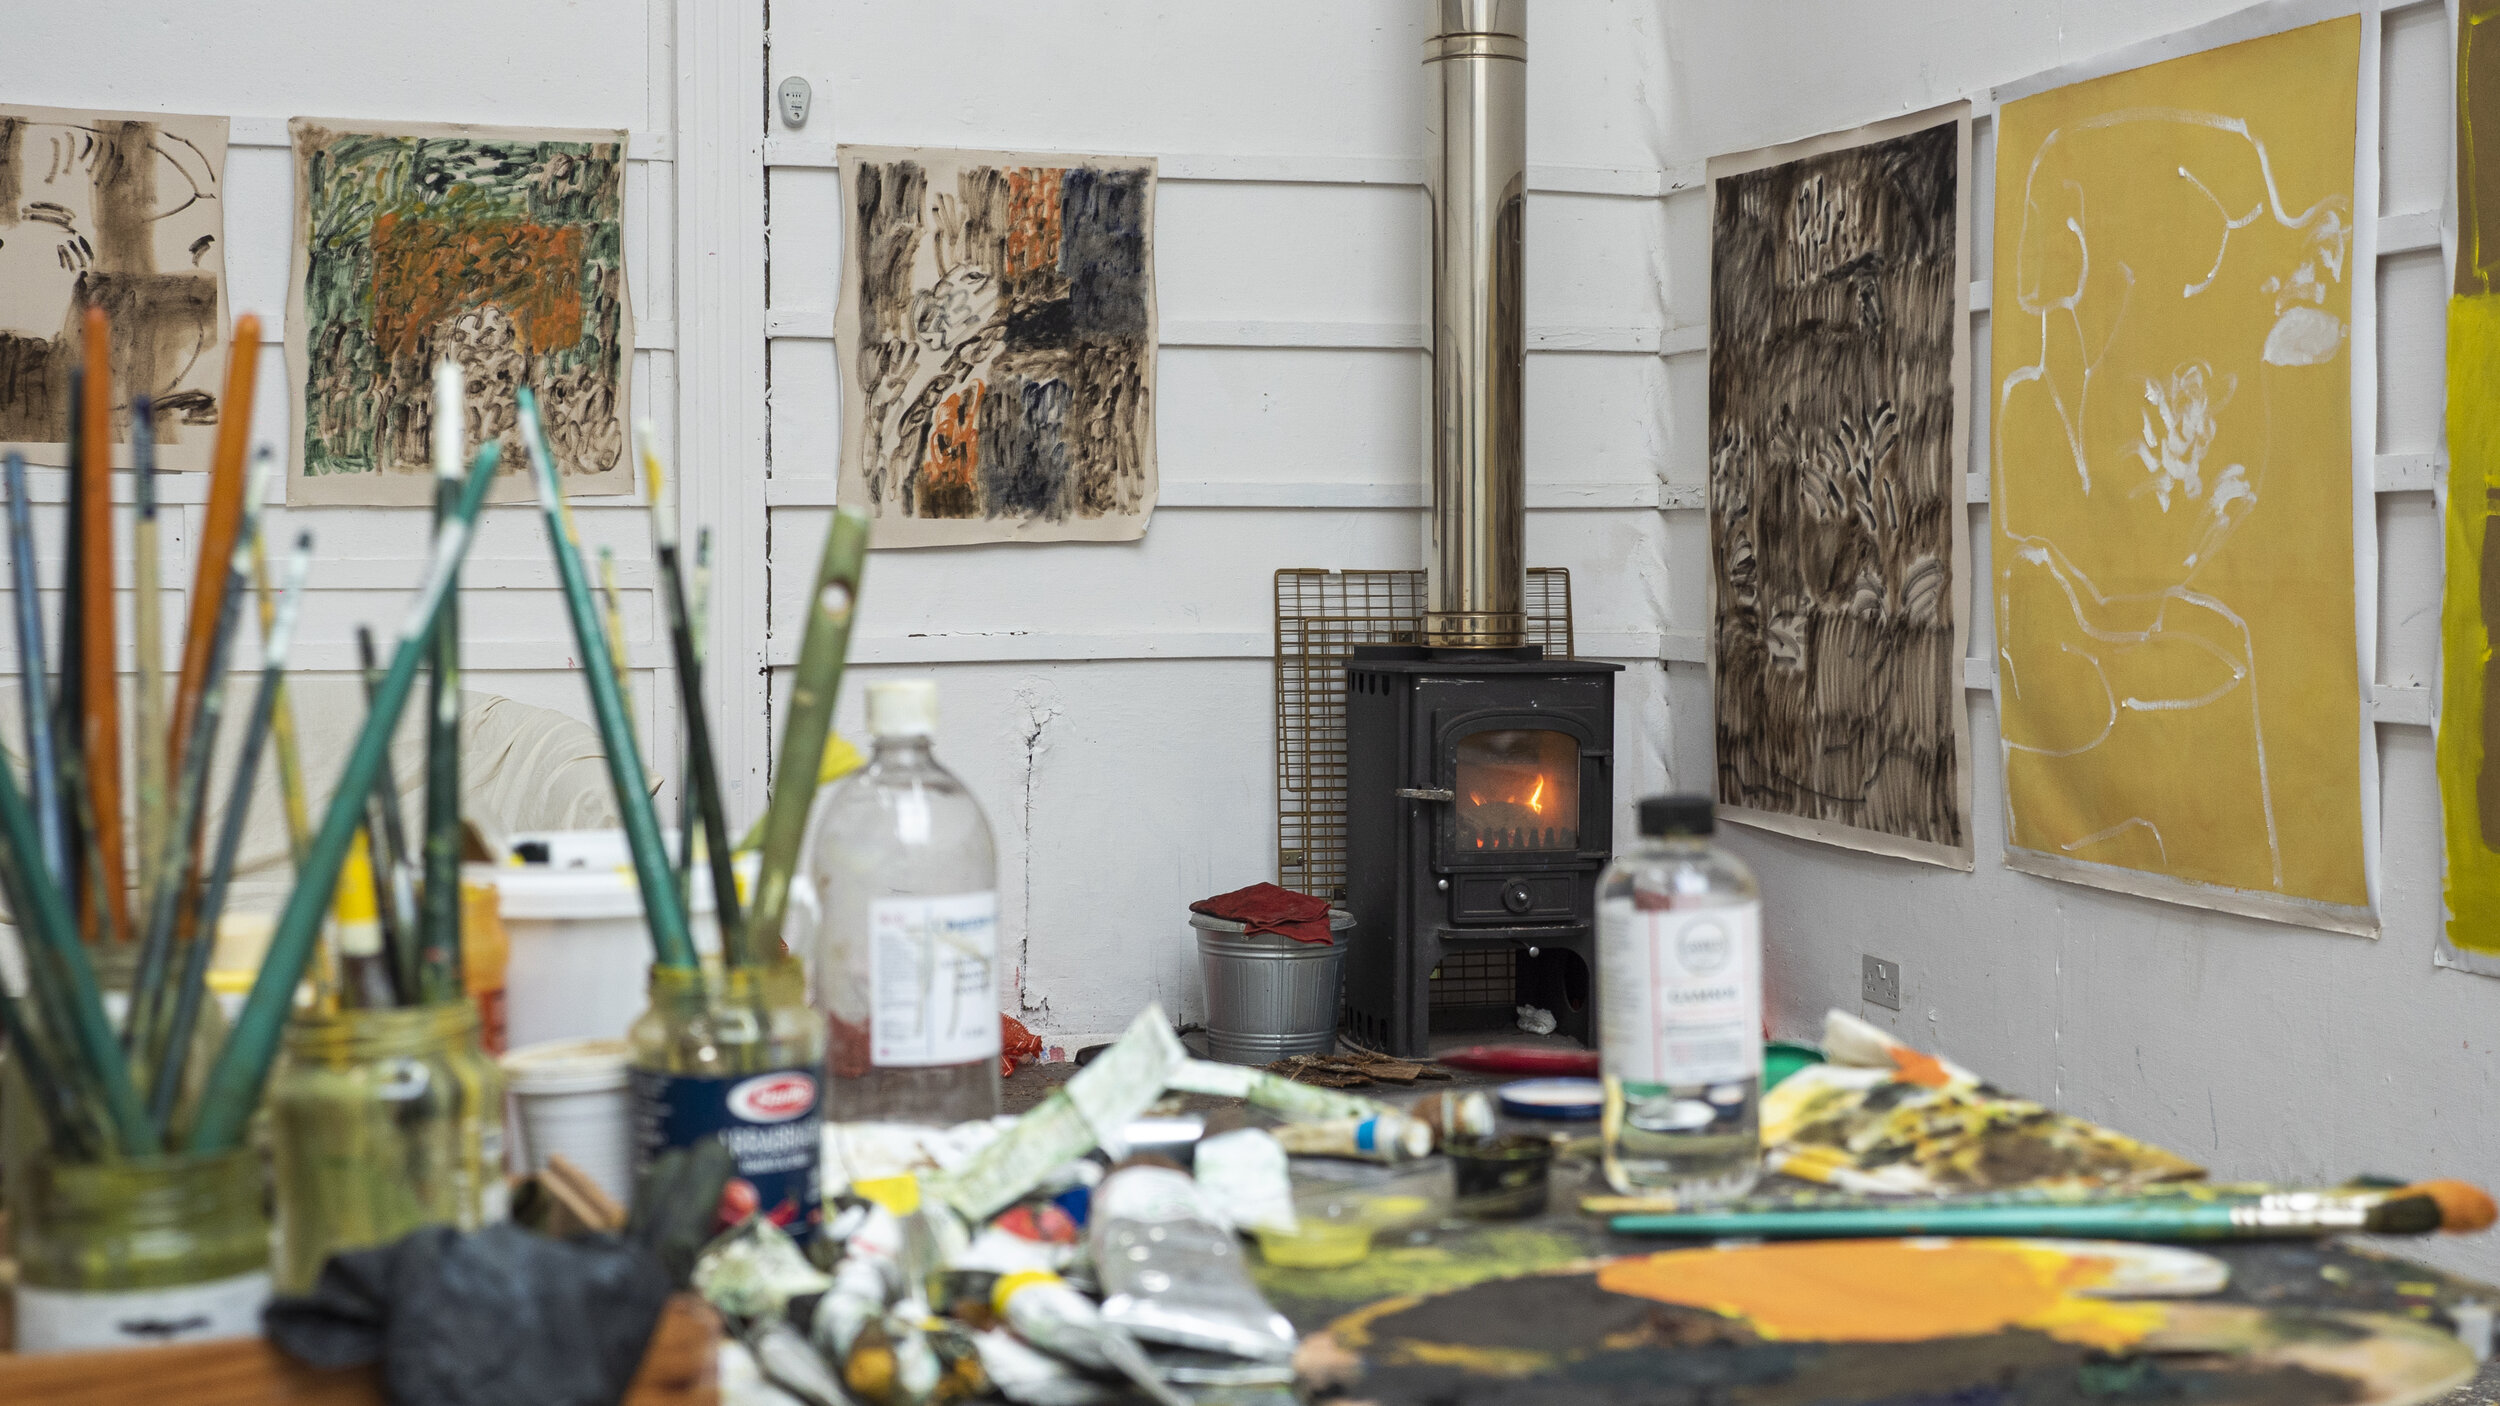 In 2019 I was awarded a tenancy at Porthmeor Studios in St Ives, Cornwall, UK. For seven weeks I painted in Studio 5. Here are some images from my time there. 